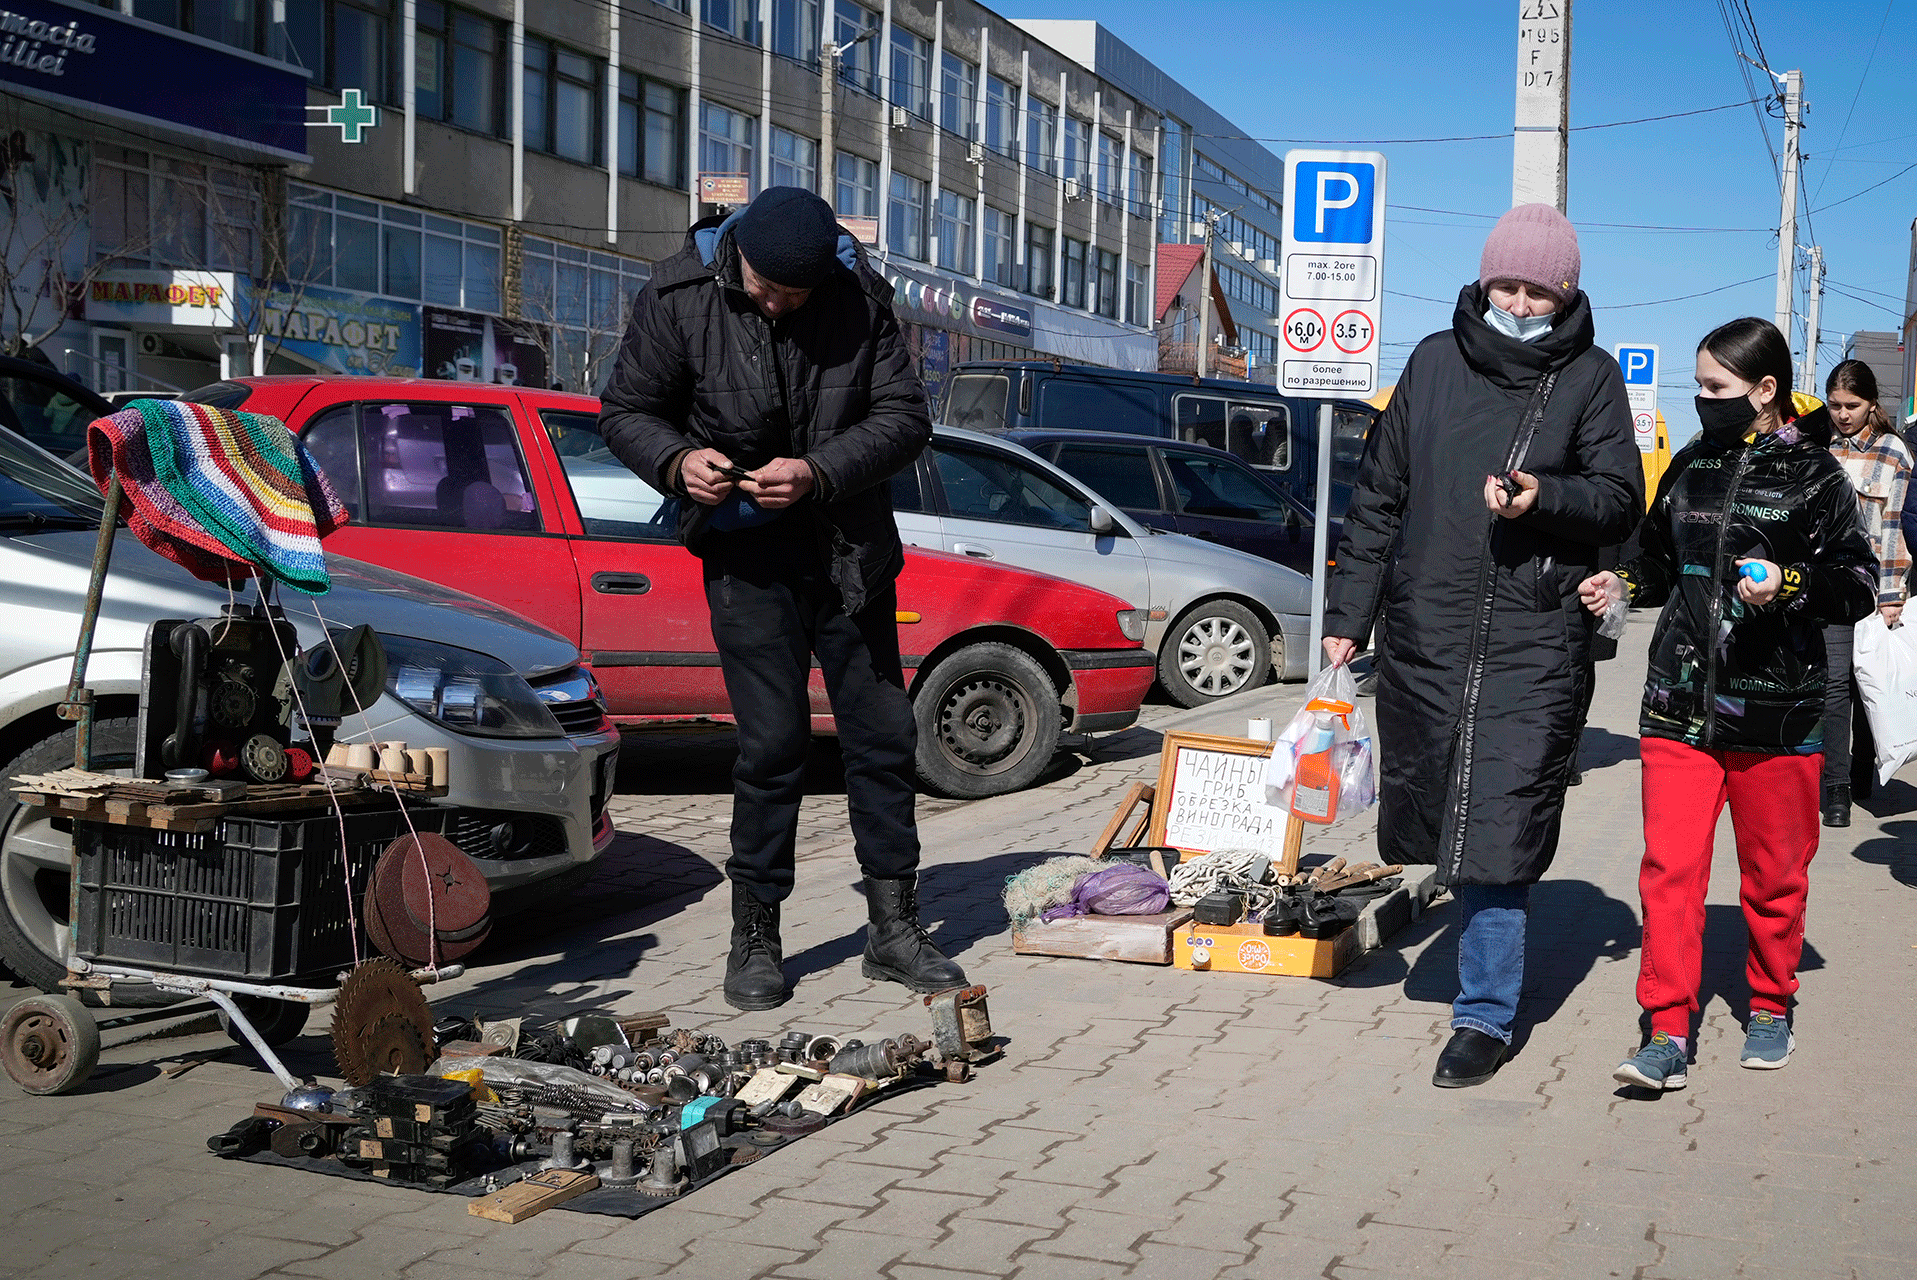 A vendor trades at a street market in Comrat, Moldova, Saturday, March 12, 2022. Across the border from war-engulfed Ukraine, tiny, impoverished Moldova, an ex-Soviet republic now looking eagerly Westward, has watched with trepidation as the Russian invasion unfolds. 